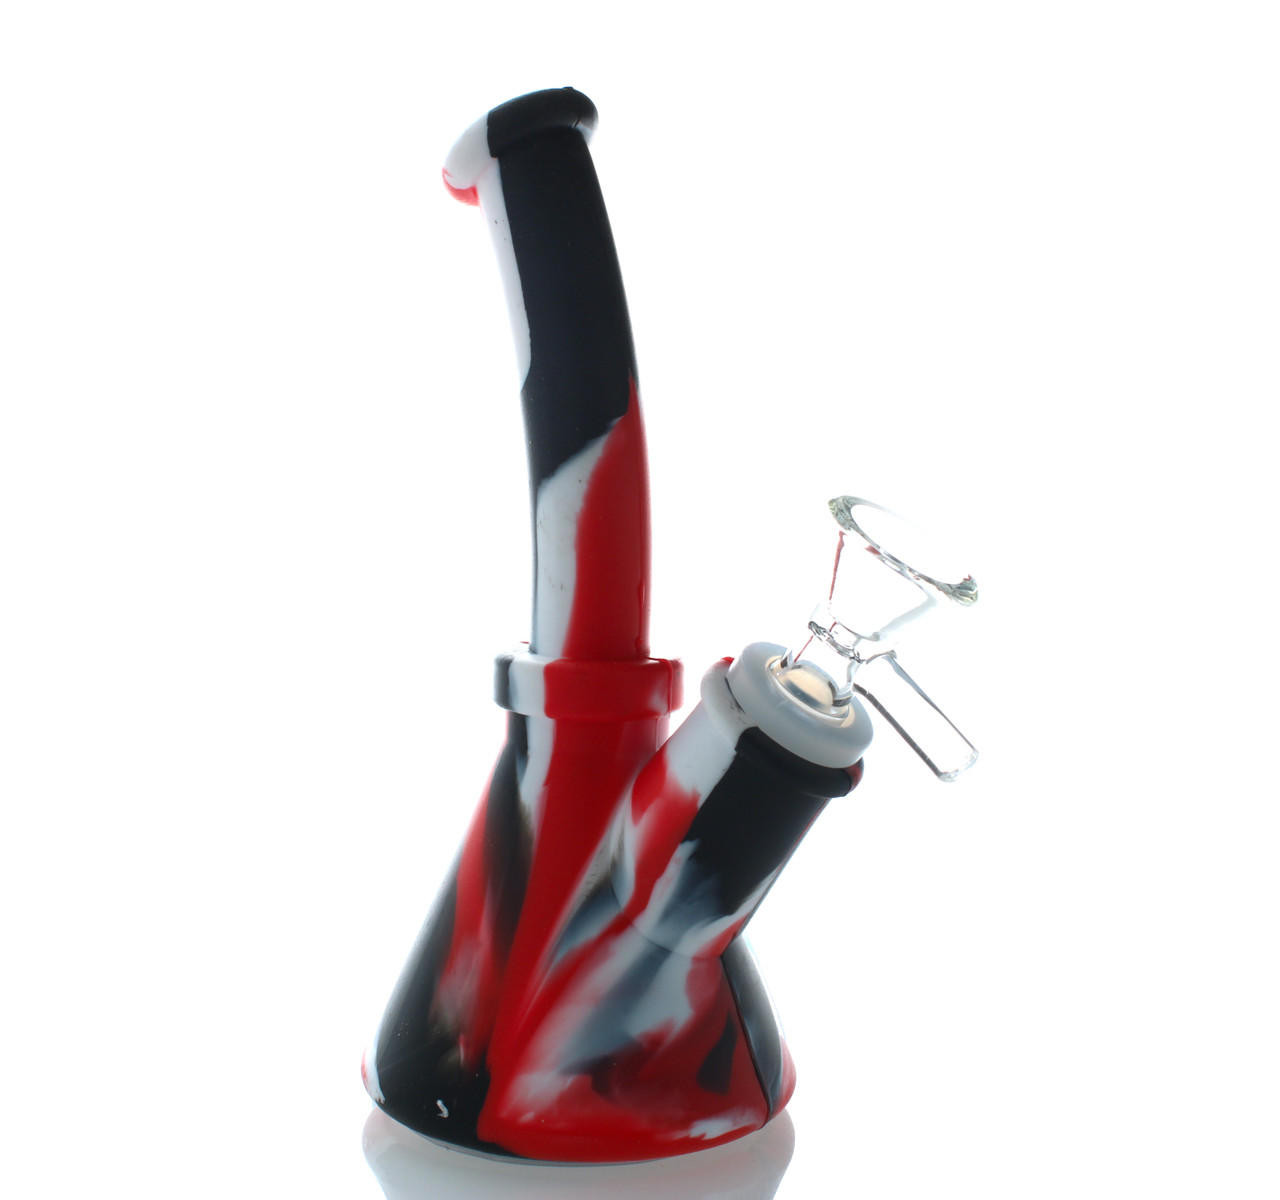 https://cdn11.bigcommerce.com/s-28tw9v9waz/images/stencil/1280x1280/products/1227/11459/6.5-waxmaid-hobee-s-mini-black-and-red-silicone-beaker-bong__11071.1685742695.jpg?c=1?imbypass=on